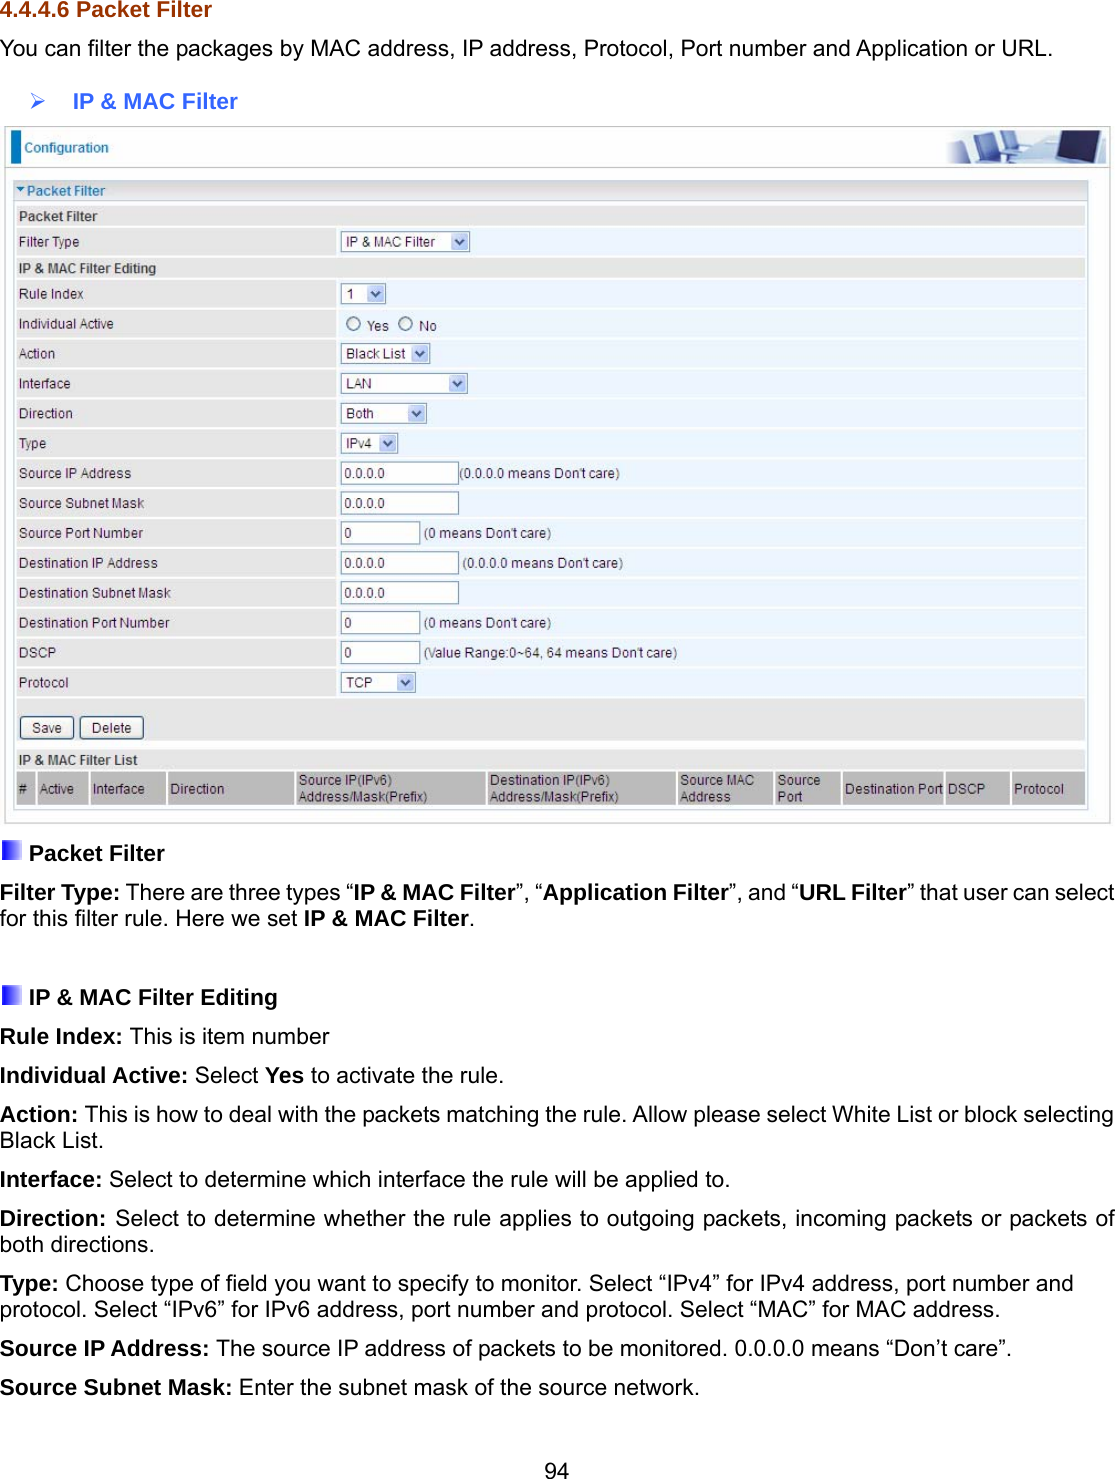 94 4.4.4.6 Packet Filter You can filter the packages by MAC address, IP address, Protocol, Port number and Application or URL.    IP &amp; MAC Filter   Packet Filter Filter Type: There are three types “IP &amp; MAC Filter”, “Application Filter”, and “URL Filter” that user can select for this filter rule. Here we set IP &amp; MAC Filter.   IP &amp; MAC Filter Editing Rule Index: This is item number Individual Active: Select Yes to activate the rule. Action: This is how to deal with the packets matching the rule. Allow please select White List or block selecting Black List. Interface: Select to determine which interface the rule will be applied to. Direction: Select to determine whether the rule applies to outgoing packets, incoming packets or packets of both directions. Type: Choose type of field you want to specify to monitor. Select “IPv4” for IPv4 address, port number and protocol. Select “IPv6” for IPv6 address, port number and protocol. Select “MAC” for MAC address.  Source IP Address: The source IP address of packets to be monitored. 0.0.0.0 means “Don’t care”. Source Subnet Mask: Enter the subnet mask of the source network. 